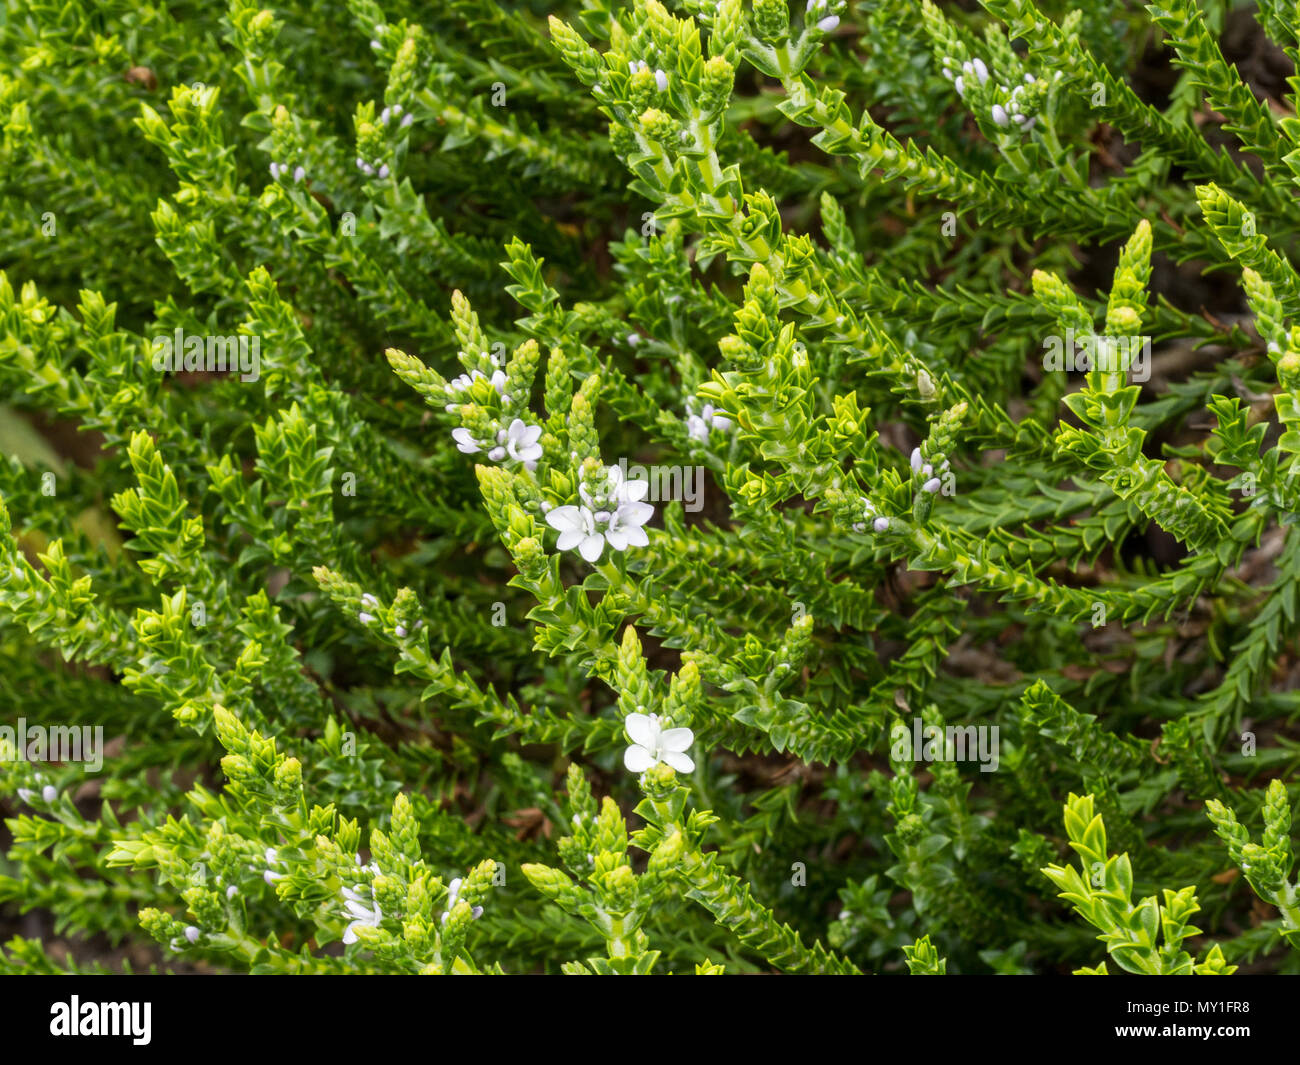 A plant of Hebe Edinensis showing the small lavender/white flowers Stock Photo